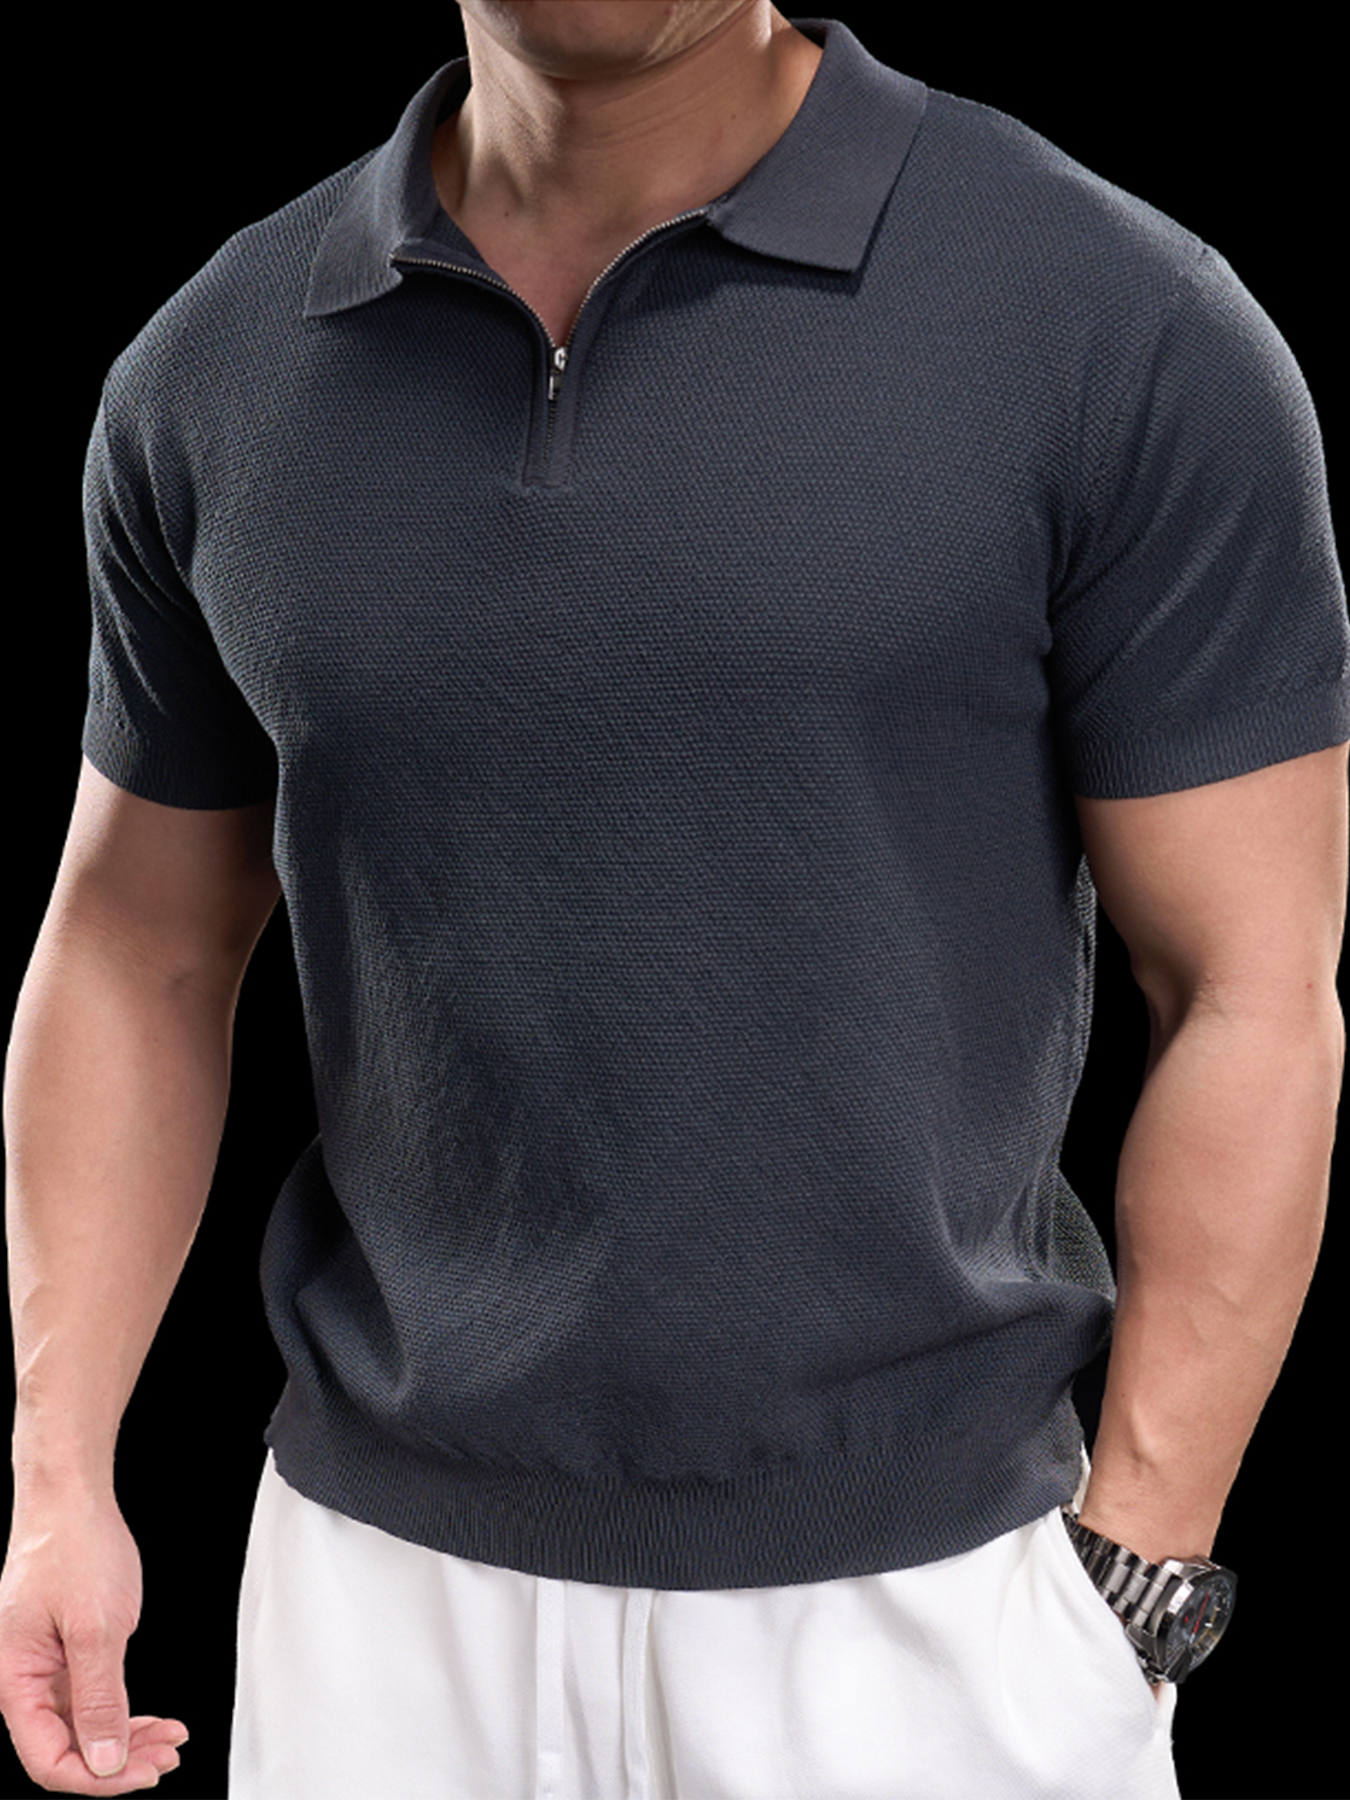 PerformancePro Active Knitted Zip Polo